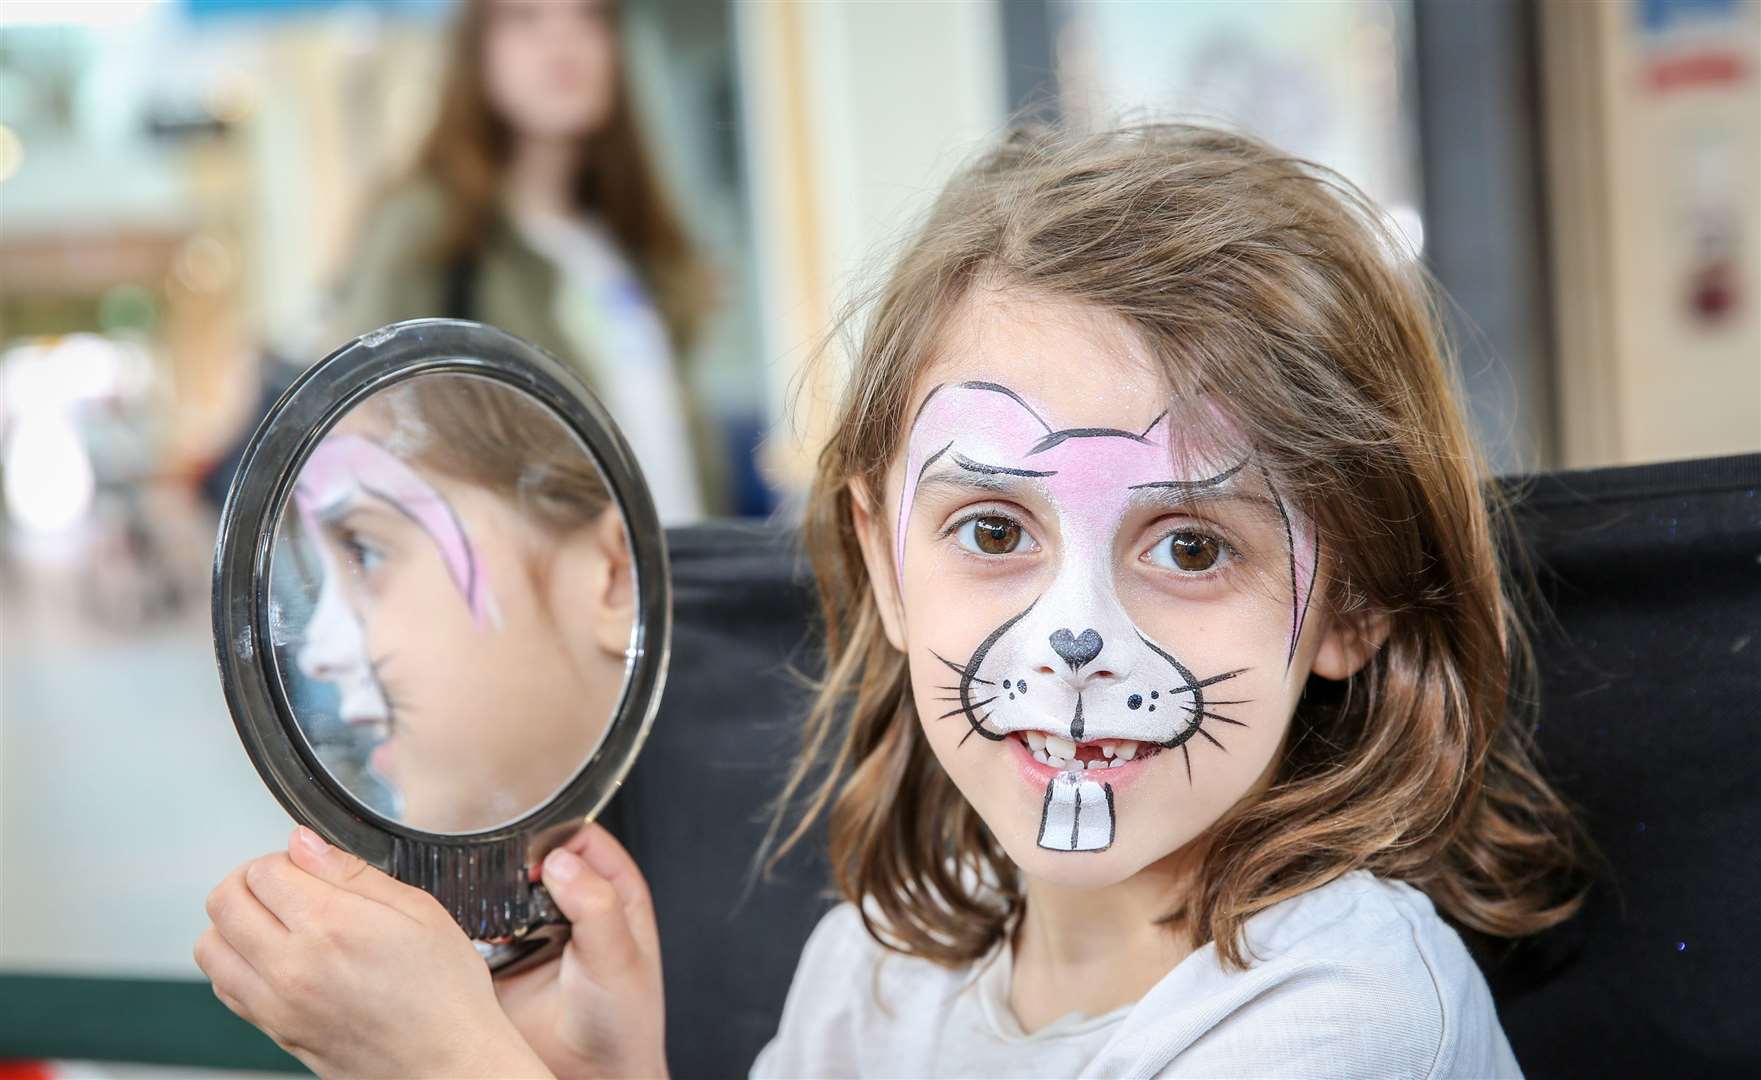 Hempstead Valley Shopping Centre has Easter fun, including face painting as Alice Johnson found out Picture: Matthew Walker